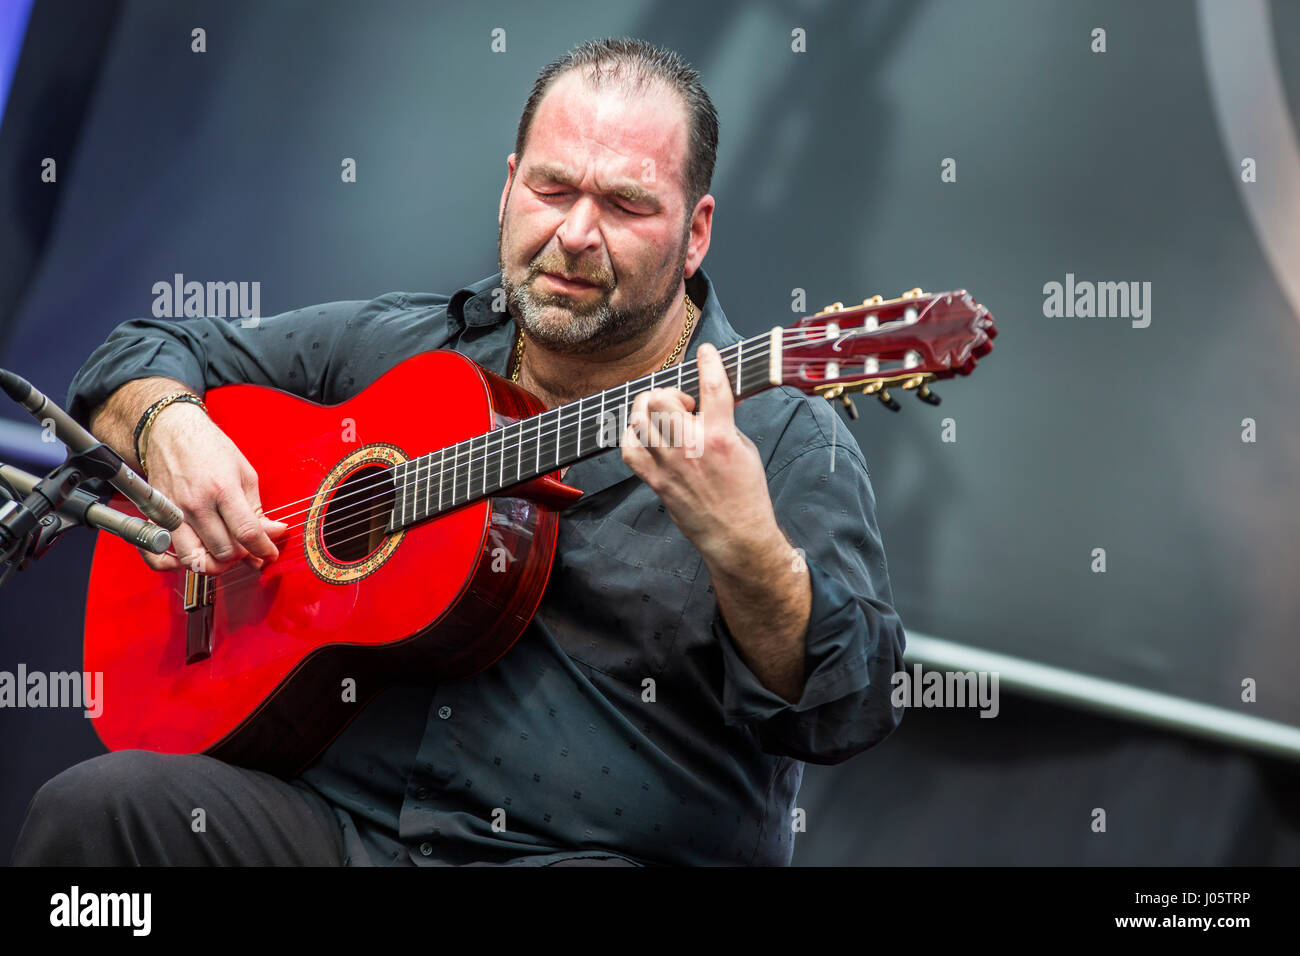 Frankfurt/Main, Germany. 5th April, 2017. Rafael Cortés, andalusian born  and Germany based flamenco guitarist, performs at Musikmesse's Acoustic  Stage as endorser for manufacturer Guitarras Hermanos Sanchis López (ESP).  Fotocredit: Christian Lademann Stock